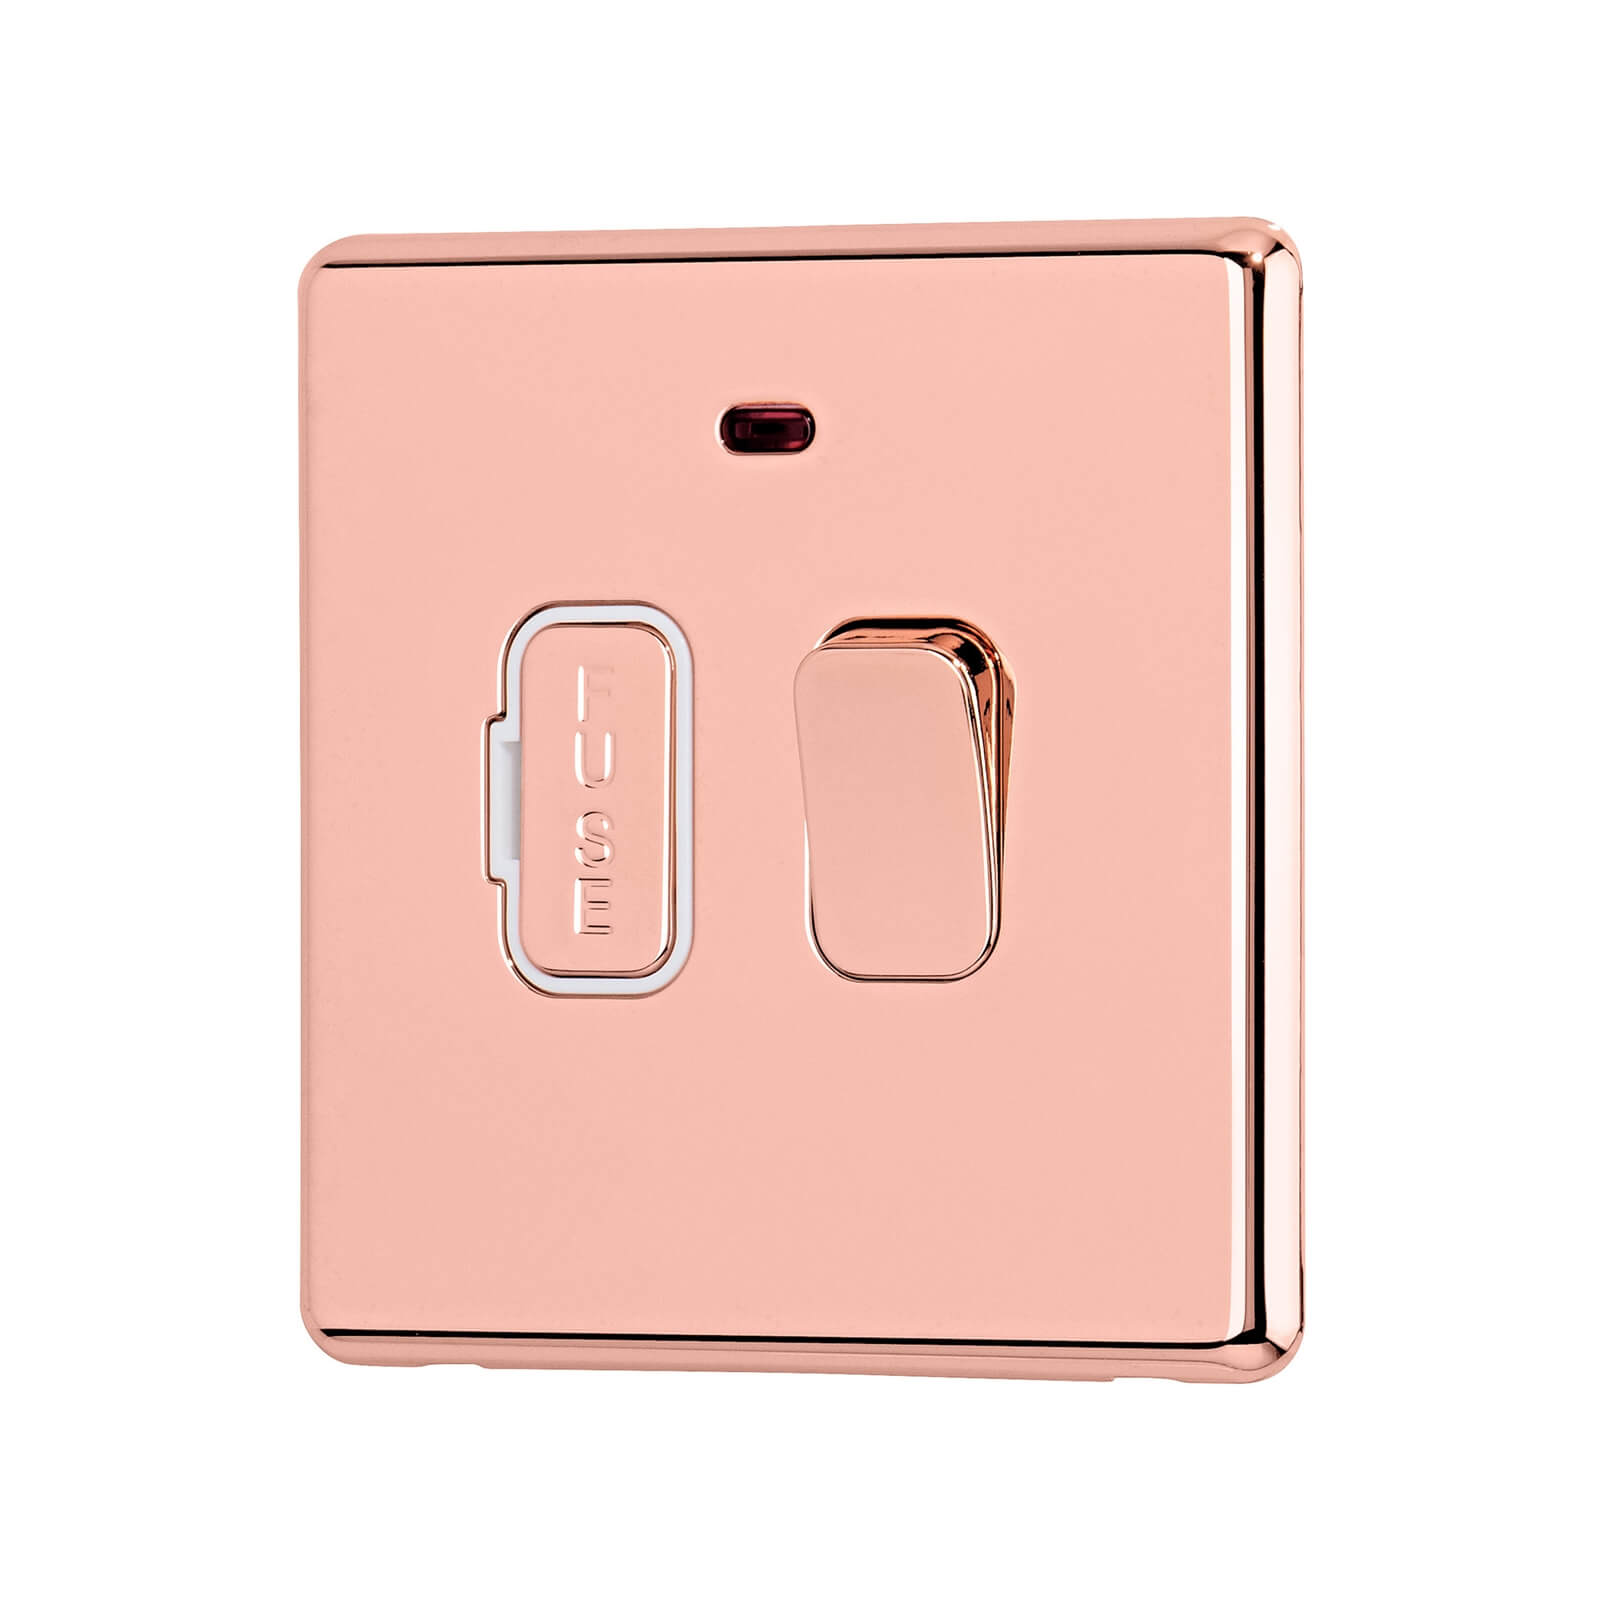 Photo of Arlec Fusion 13a Rose Gold Switched Fused Connection Unit